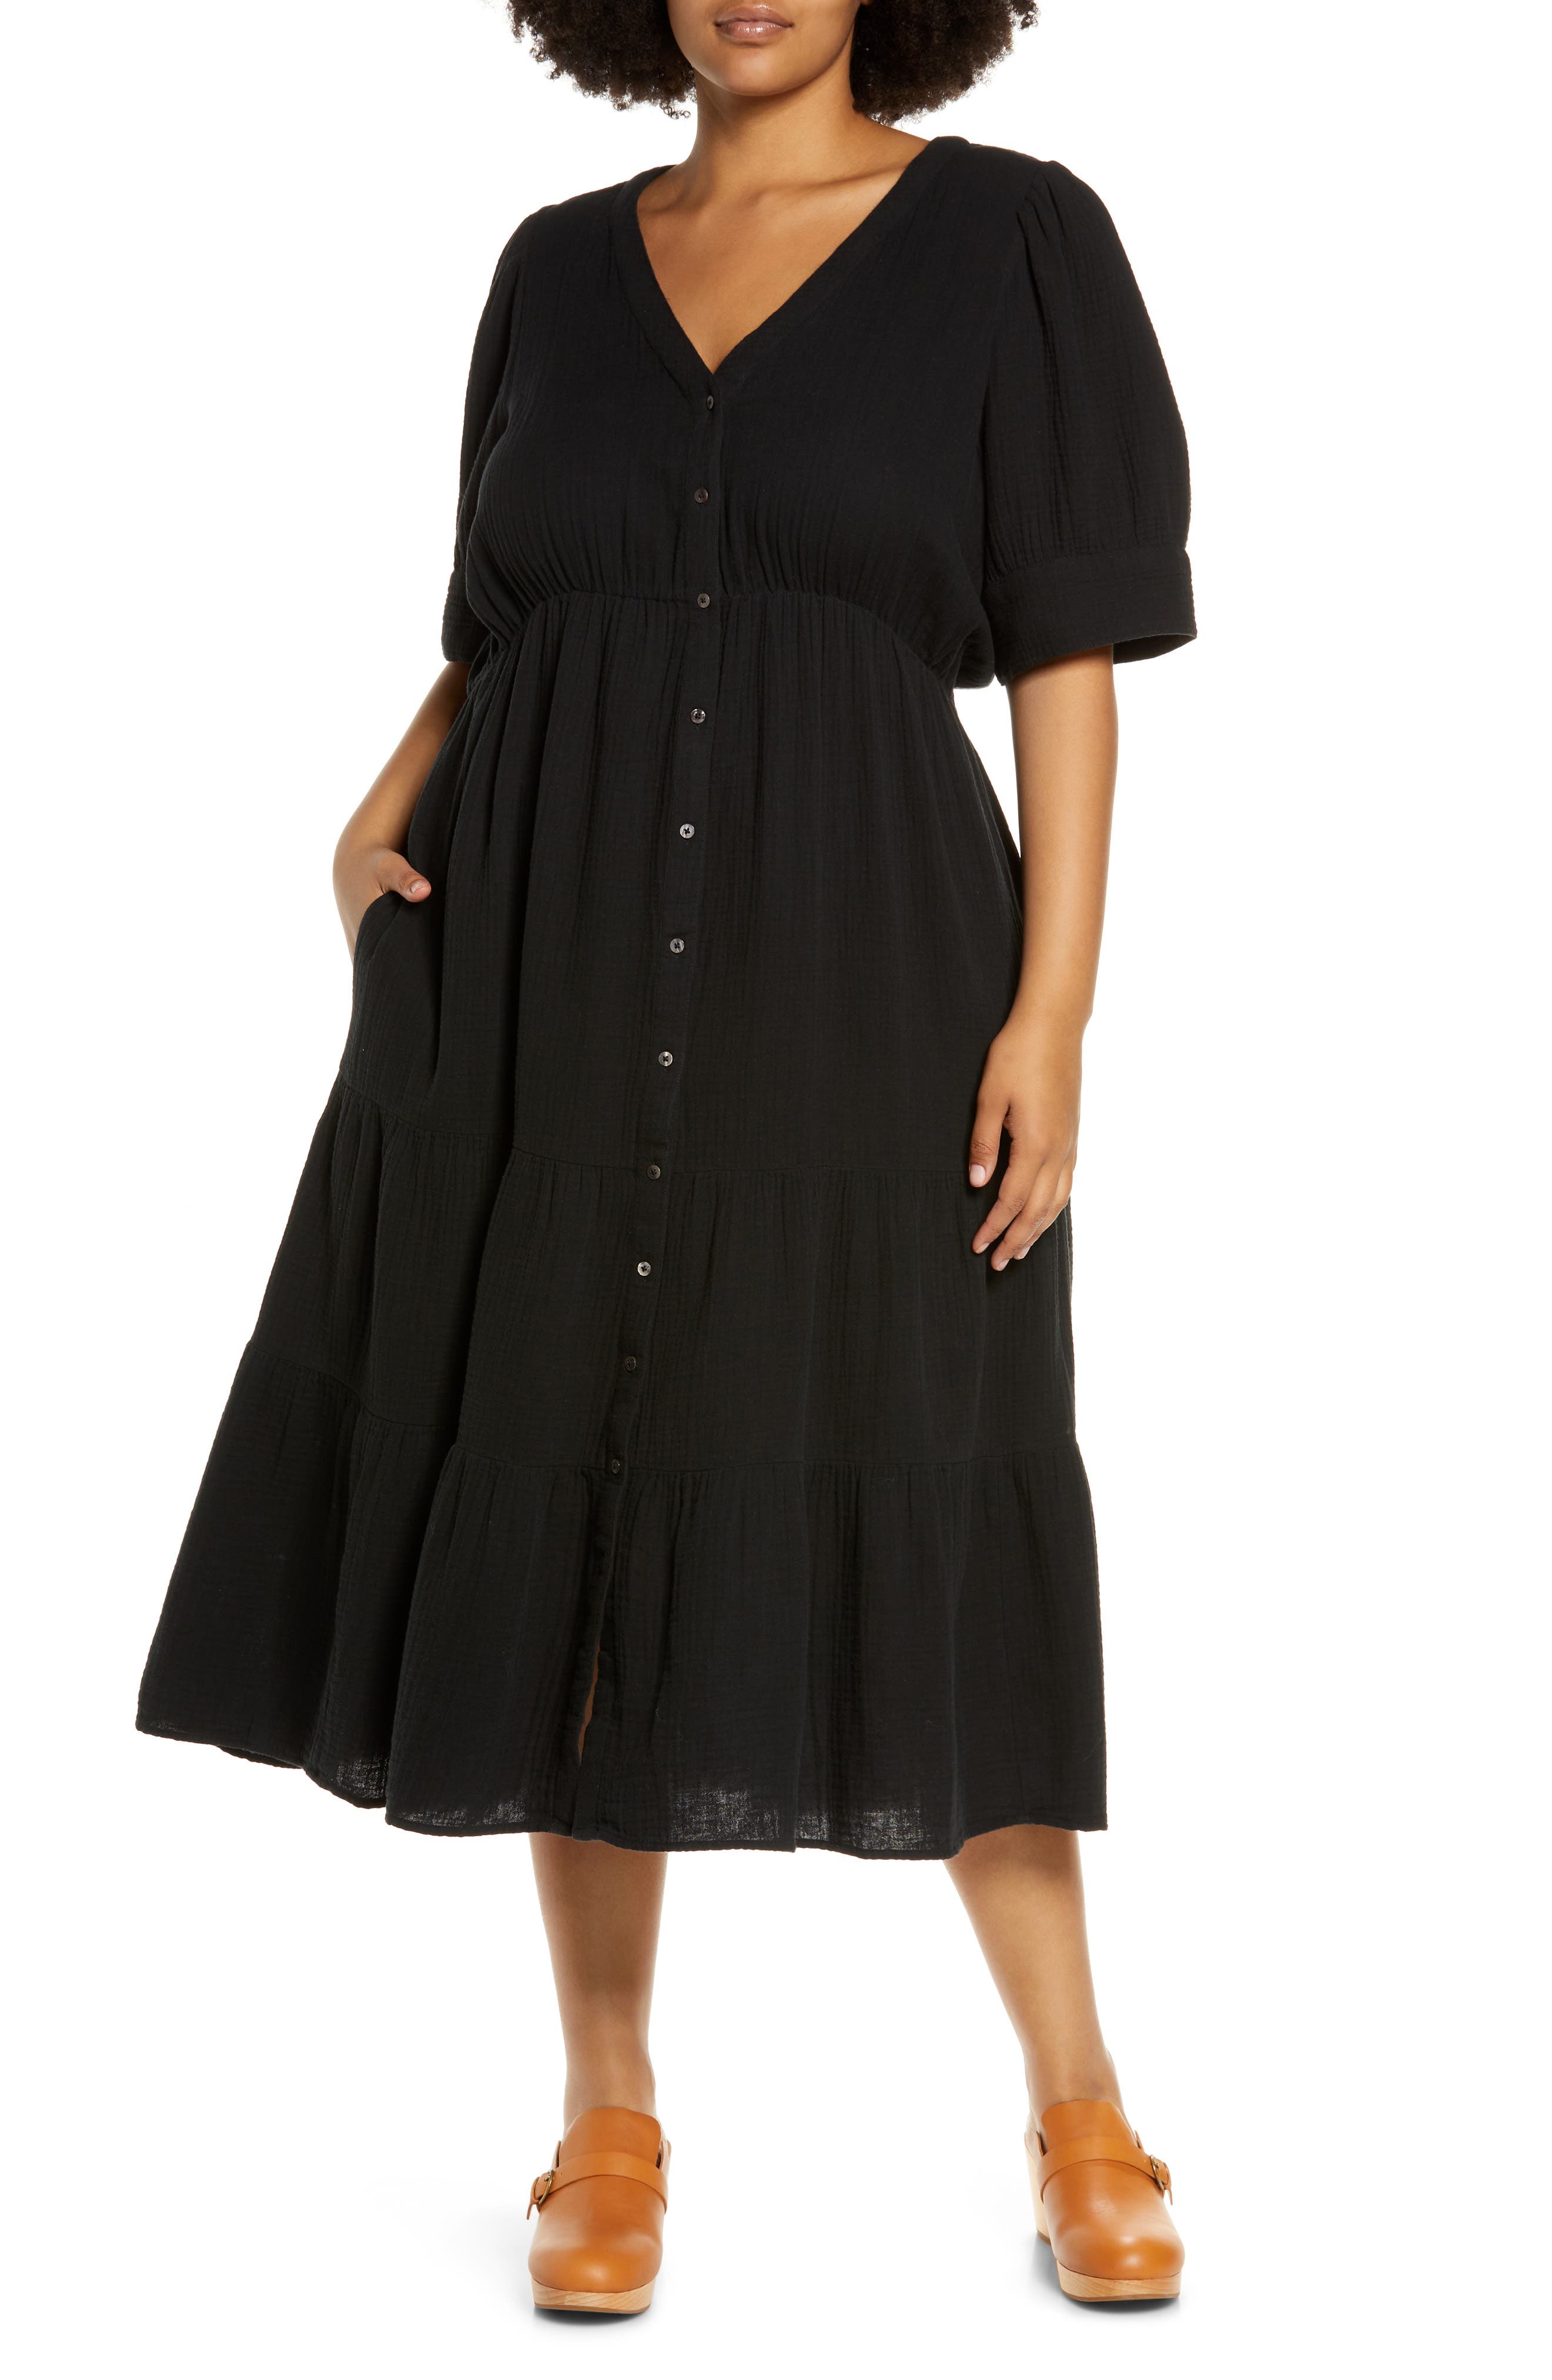 100% Cotton Plus Size Clothing For ...